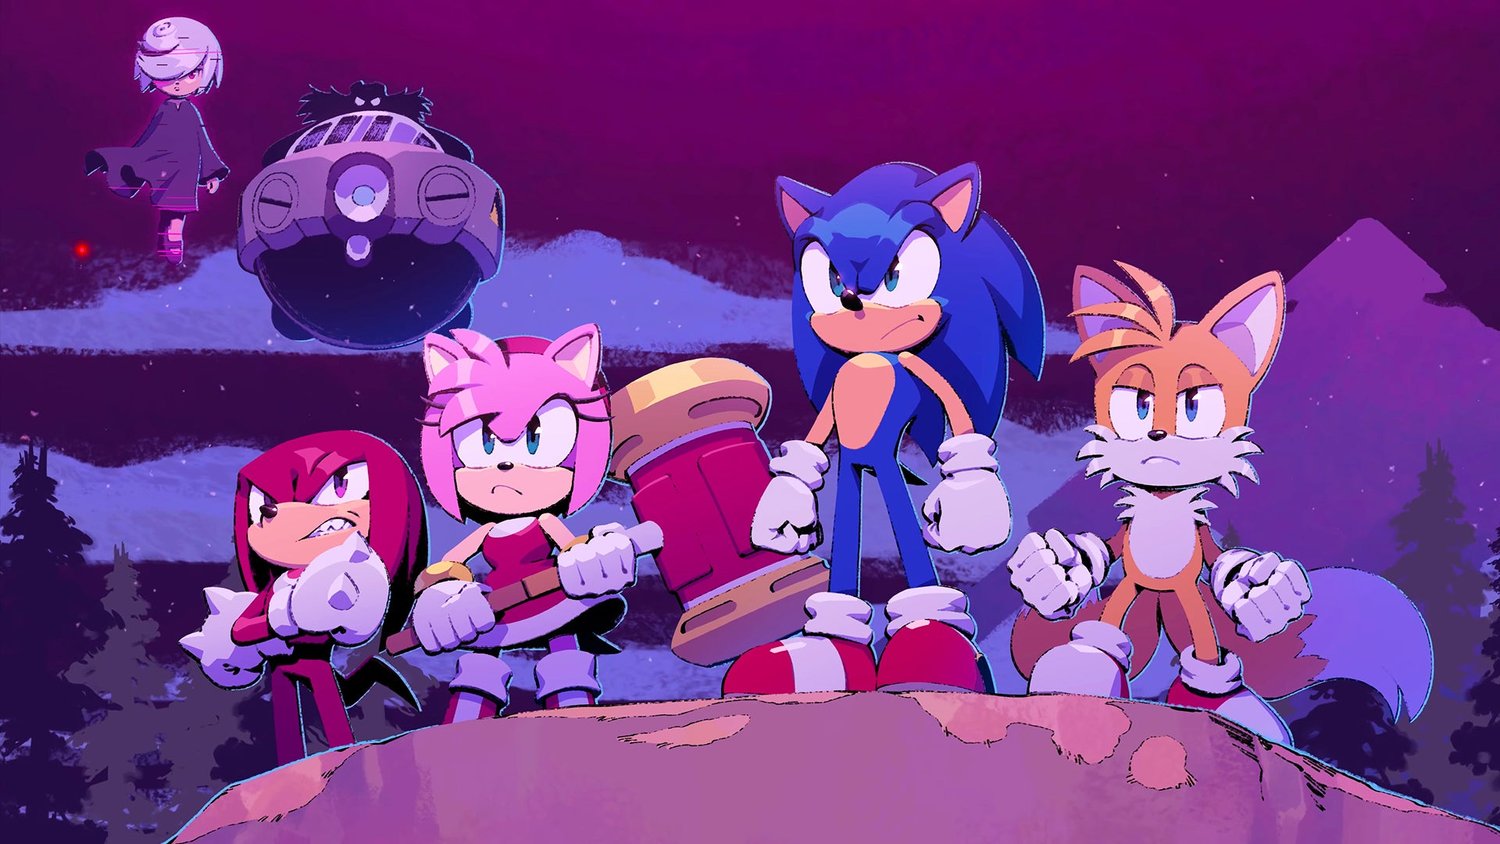 Sonic Frontiers: The Final Horizon” builds upon previous success